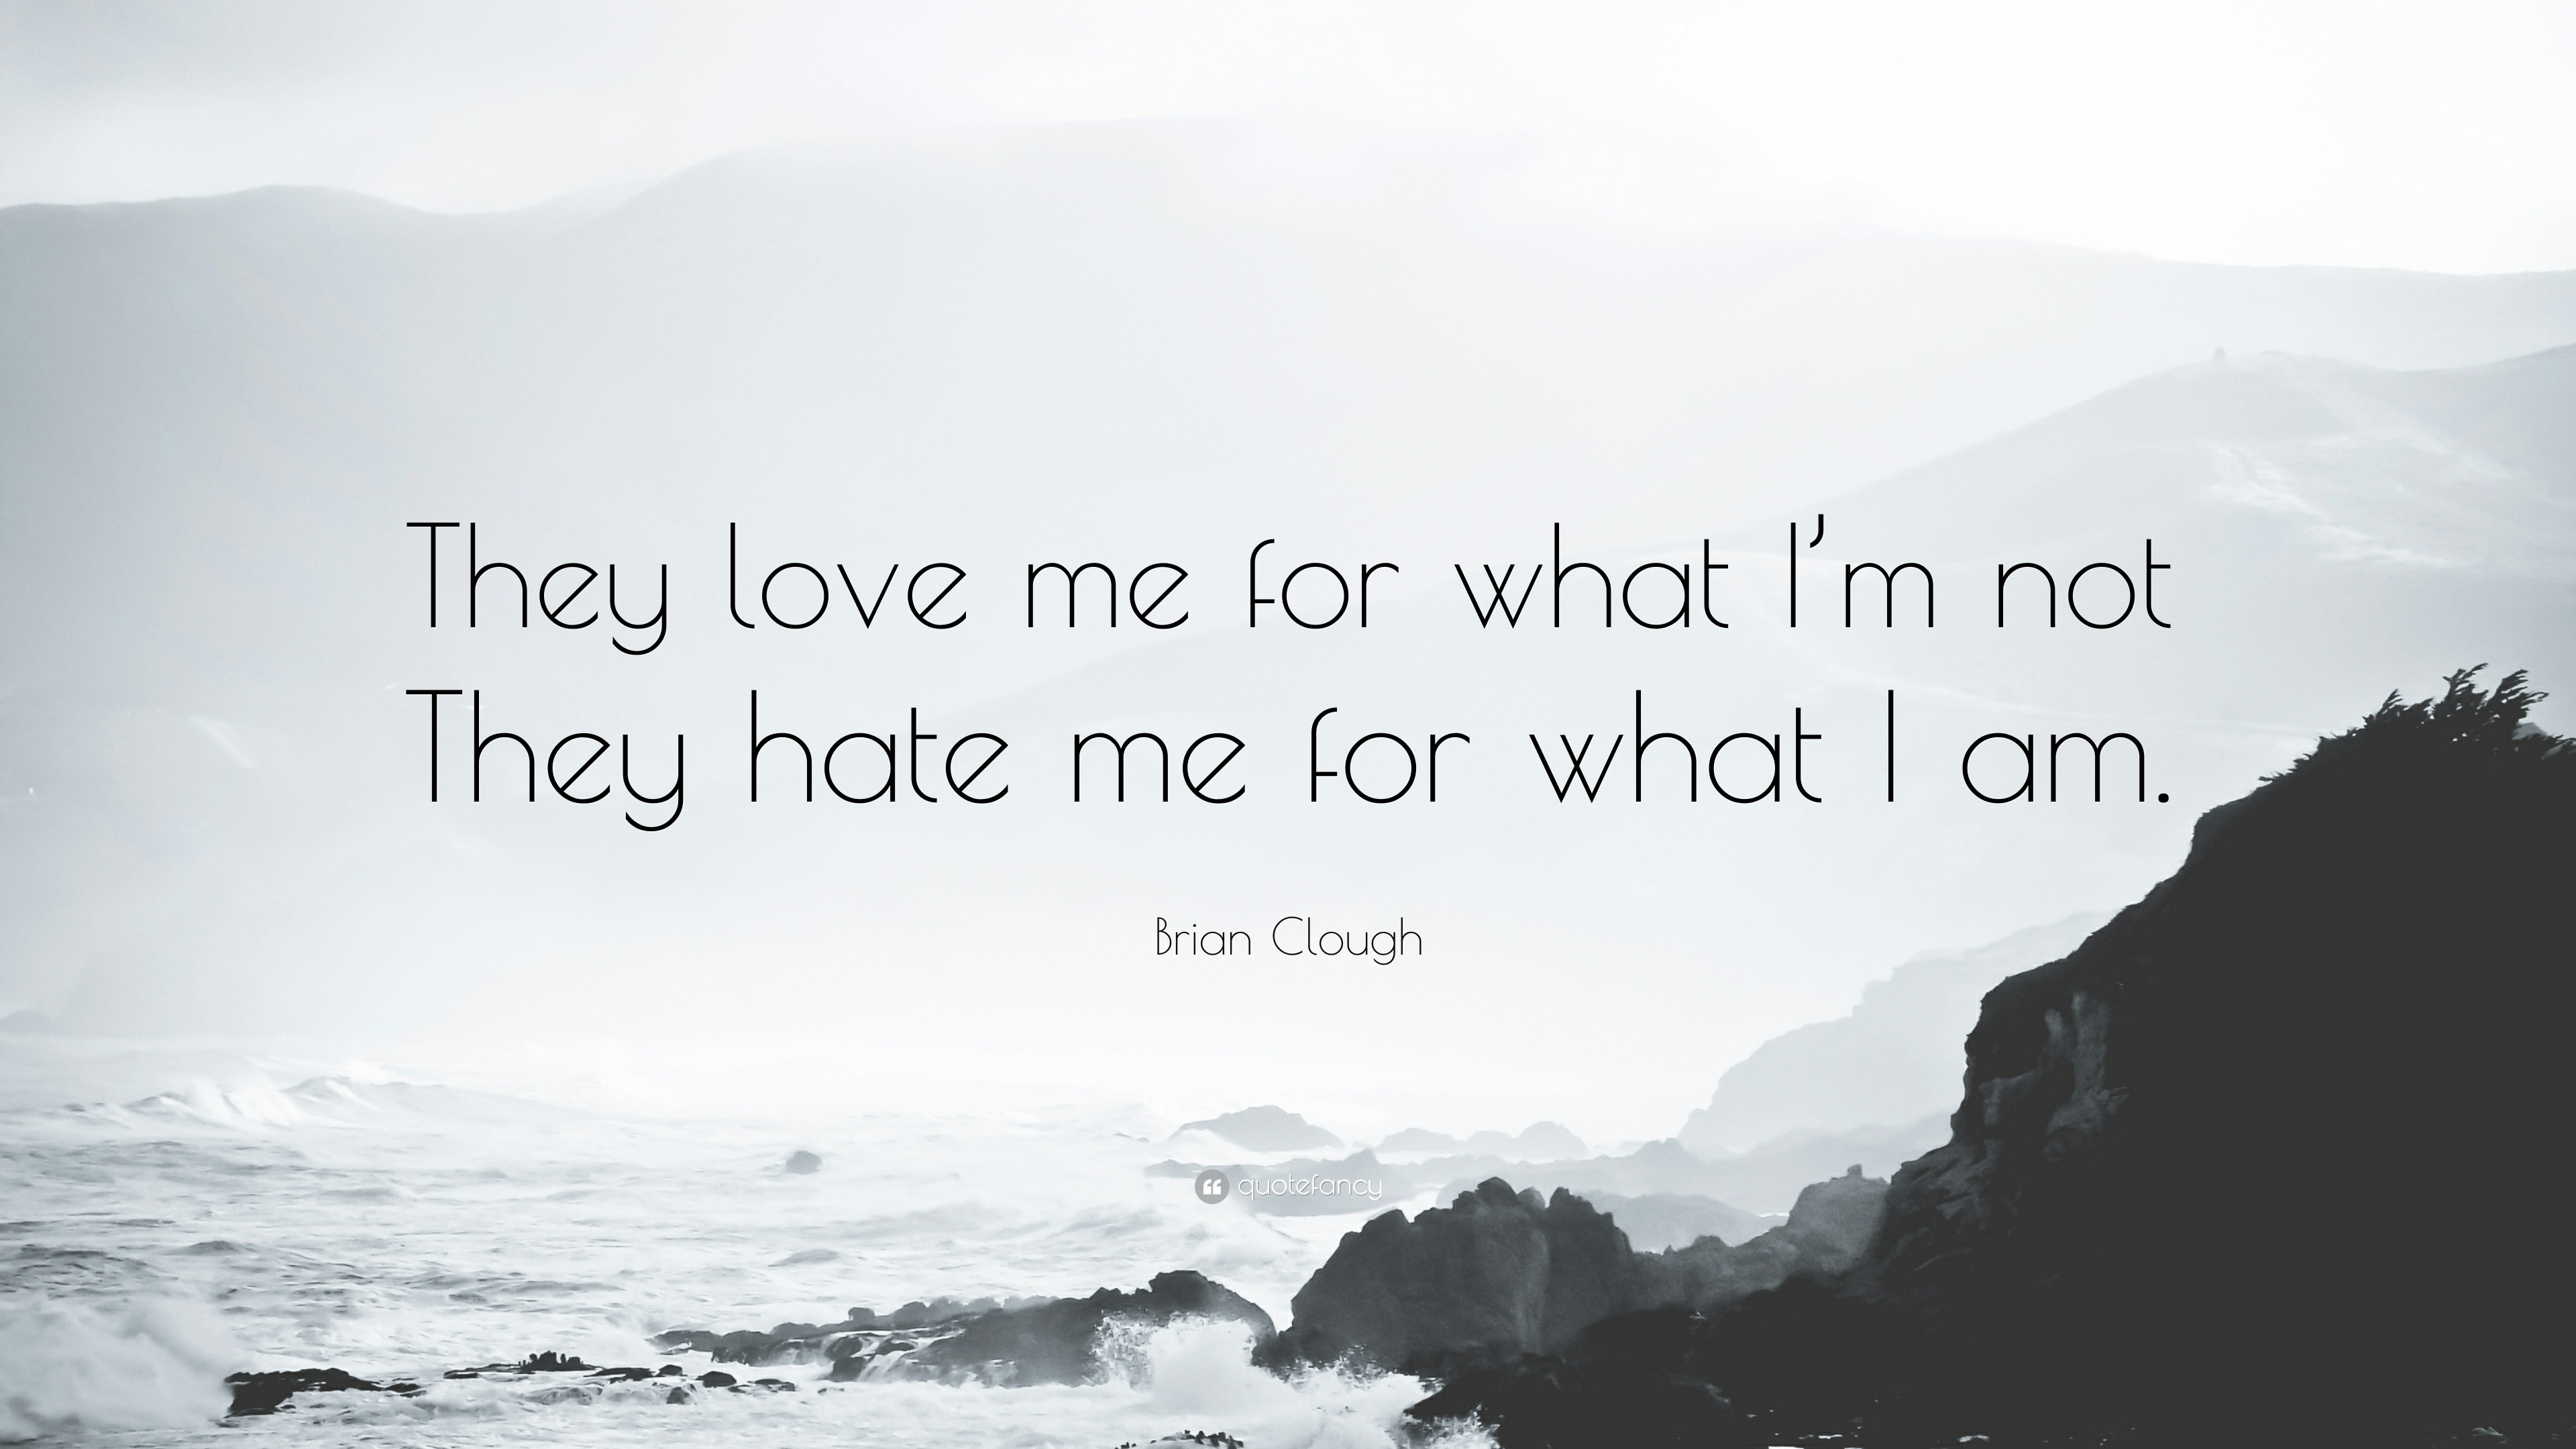 Hate Me or Love Me Quotes | Thousands of Inspiration Quotes About Love